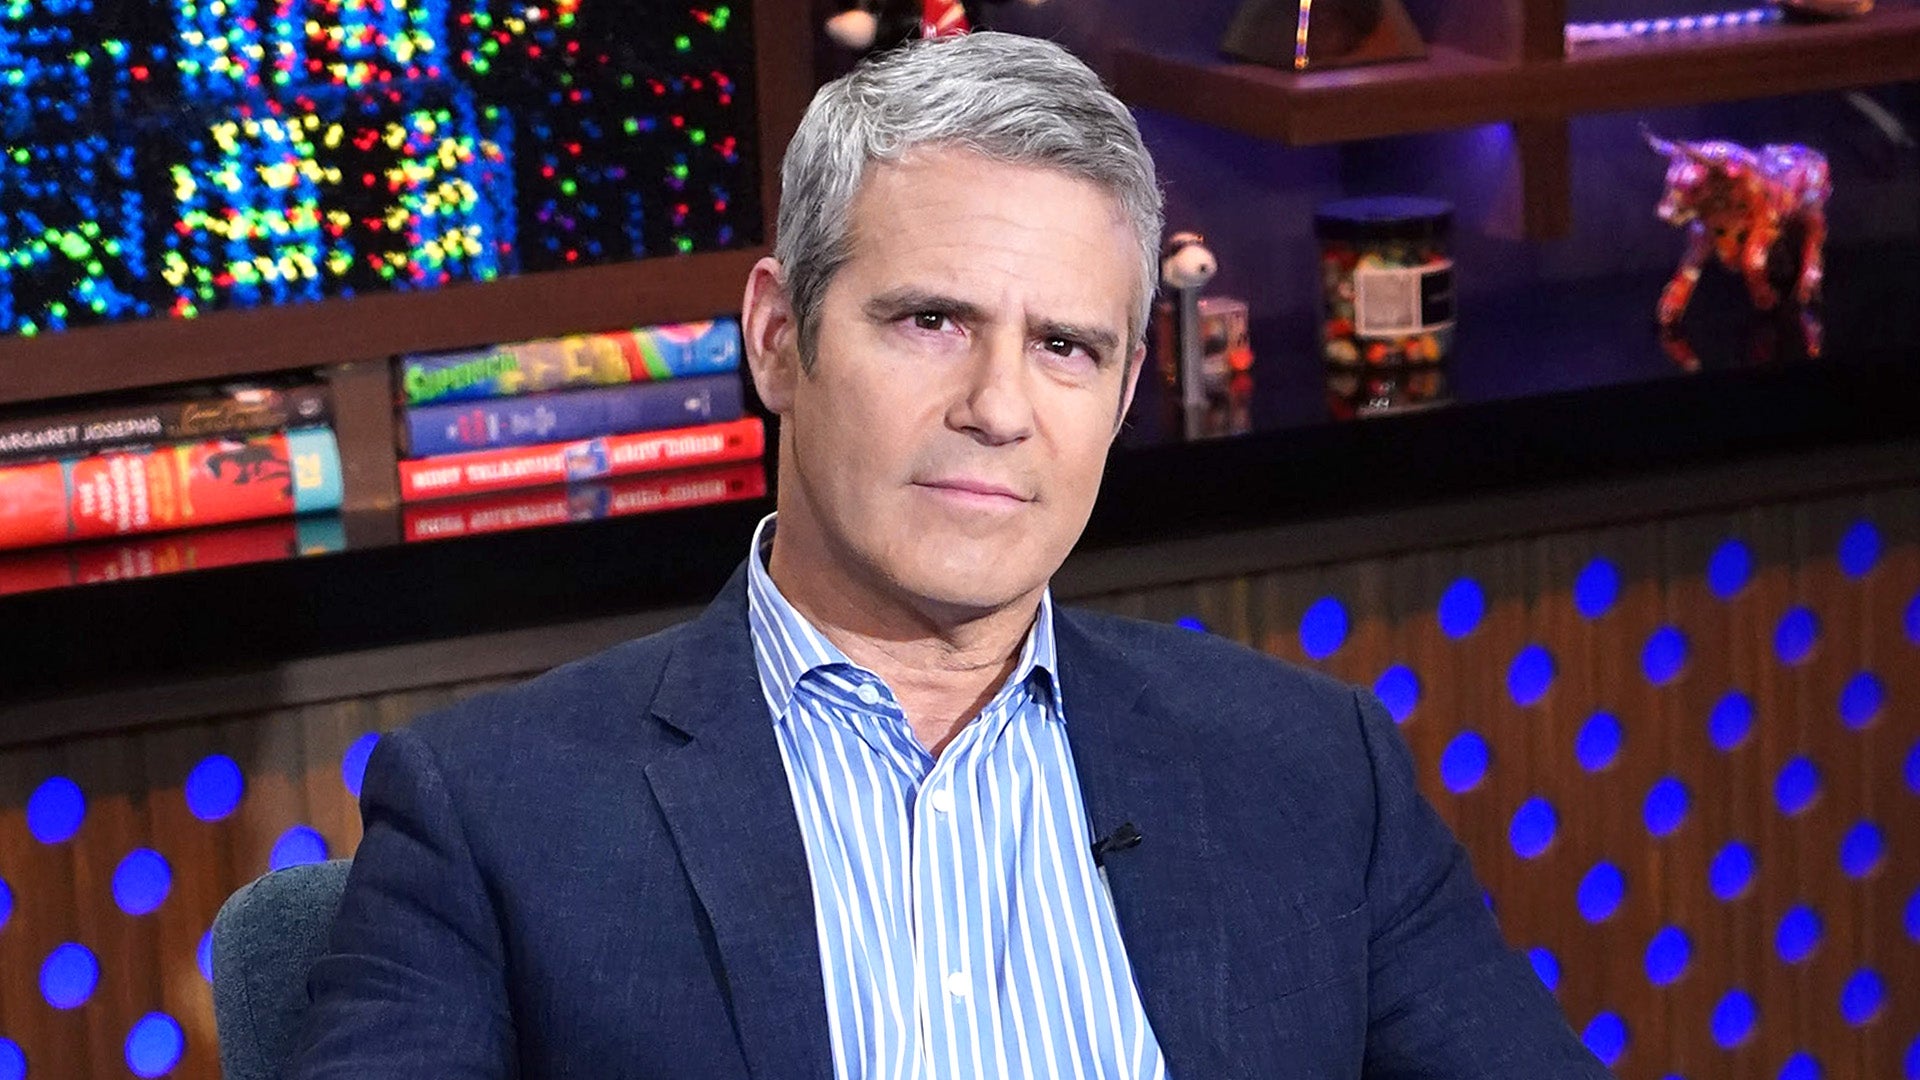 Andy Cohen Responds to 'Real Housewives' Toxic Work Environment Allegations